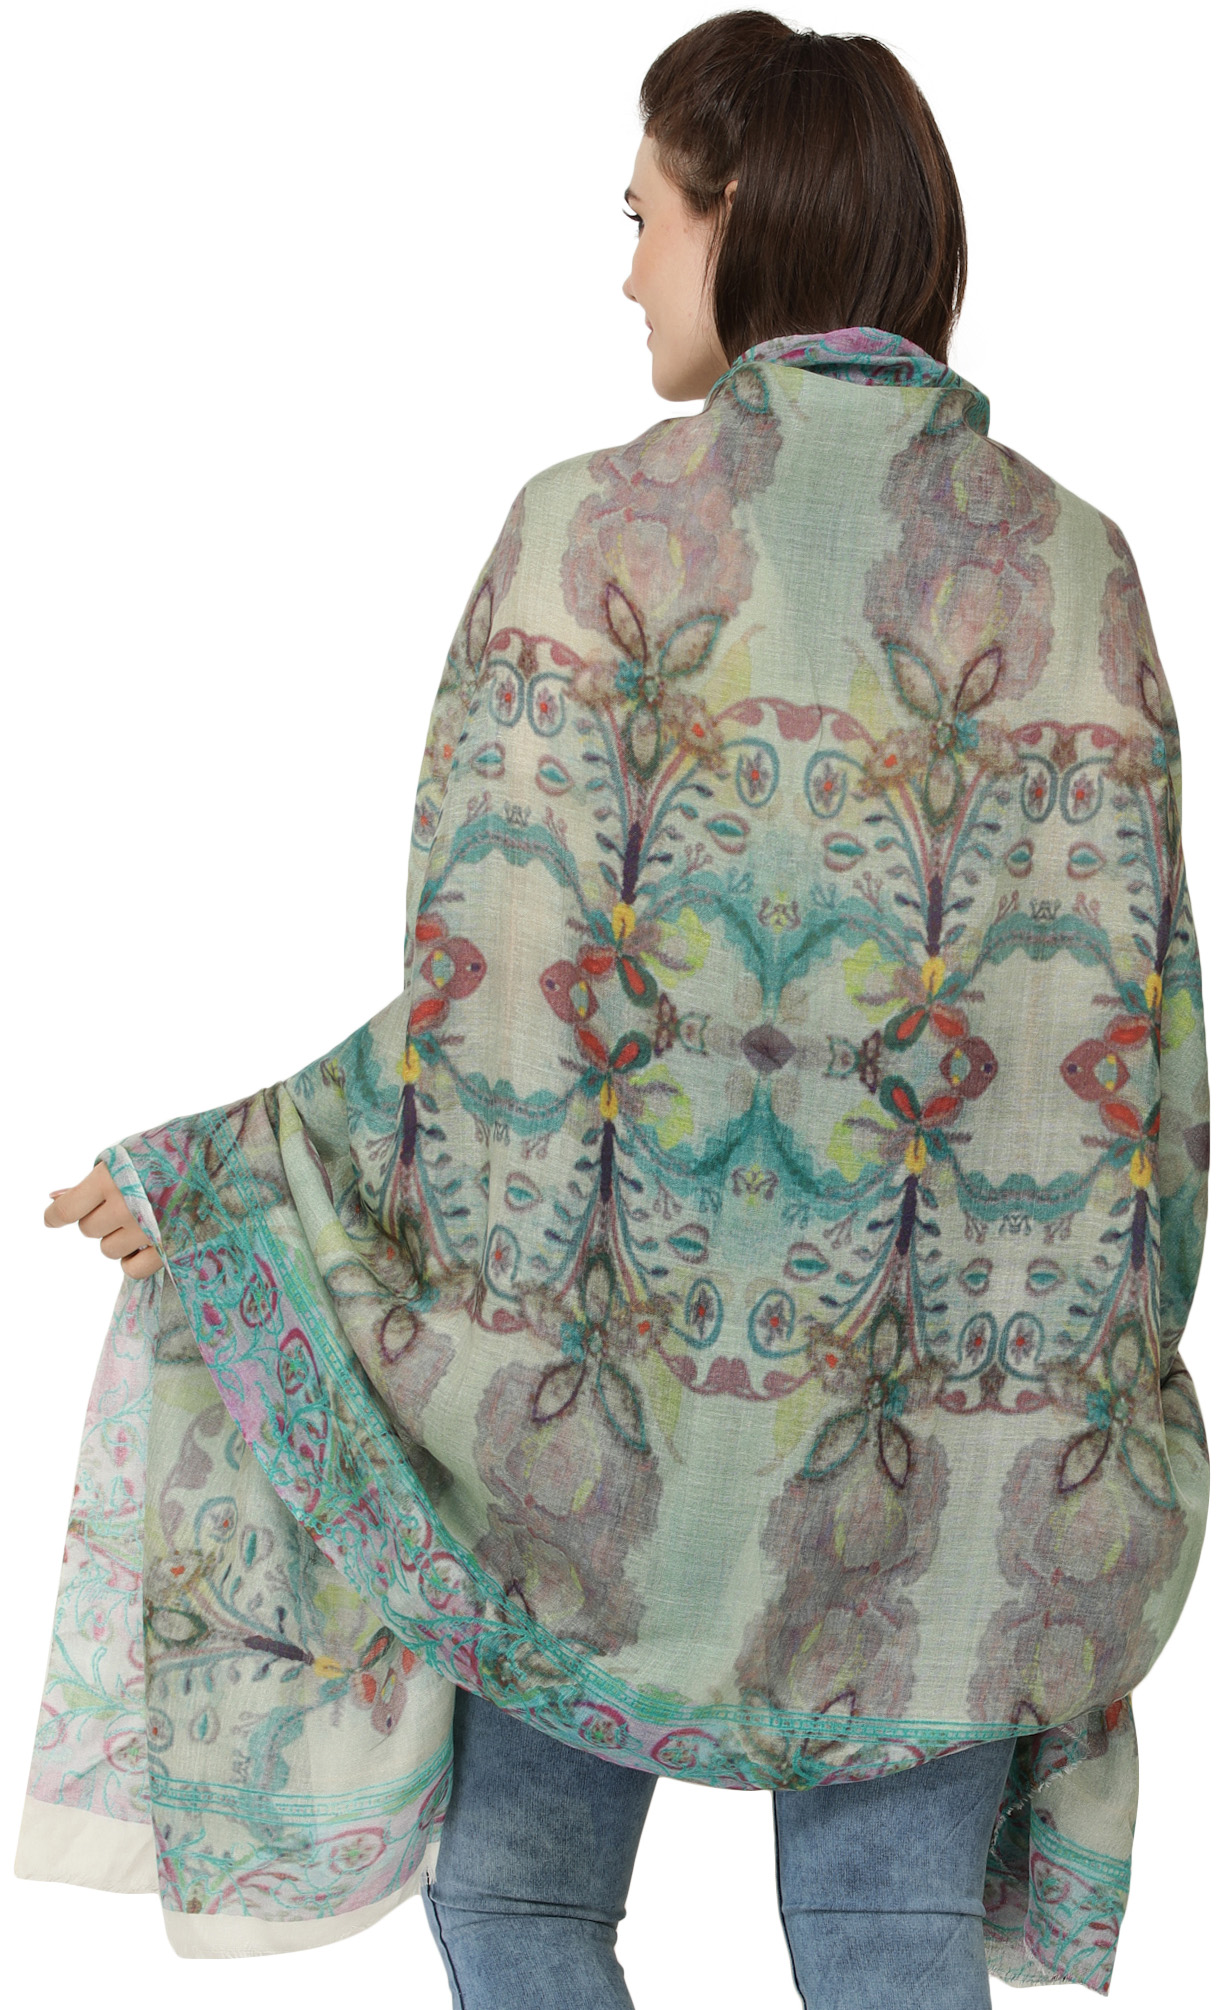 Loden-Frost Digital-Printed Shawl from Amritsar